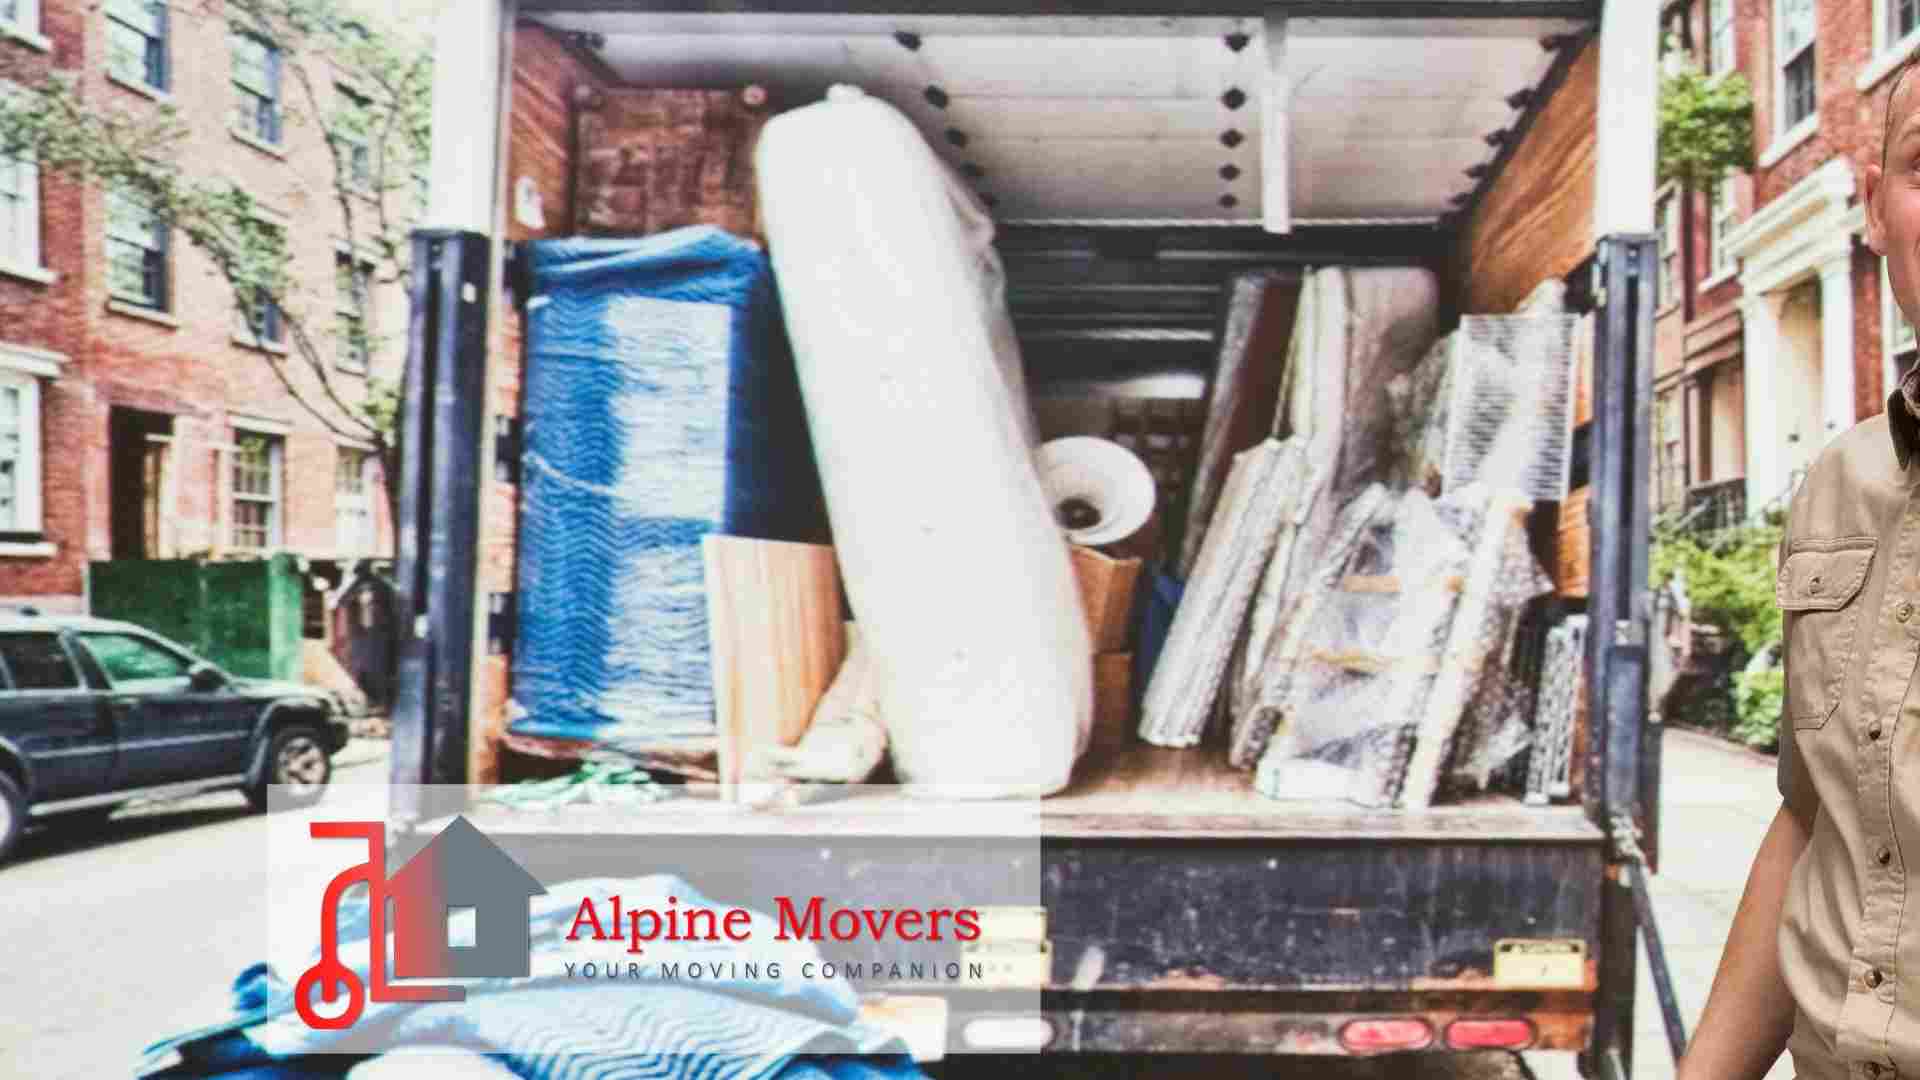 Heavy Trucks - 1-3 Bedroom Shifting Services in Sharjah - Alpine Movers and Packers in Sharjah